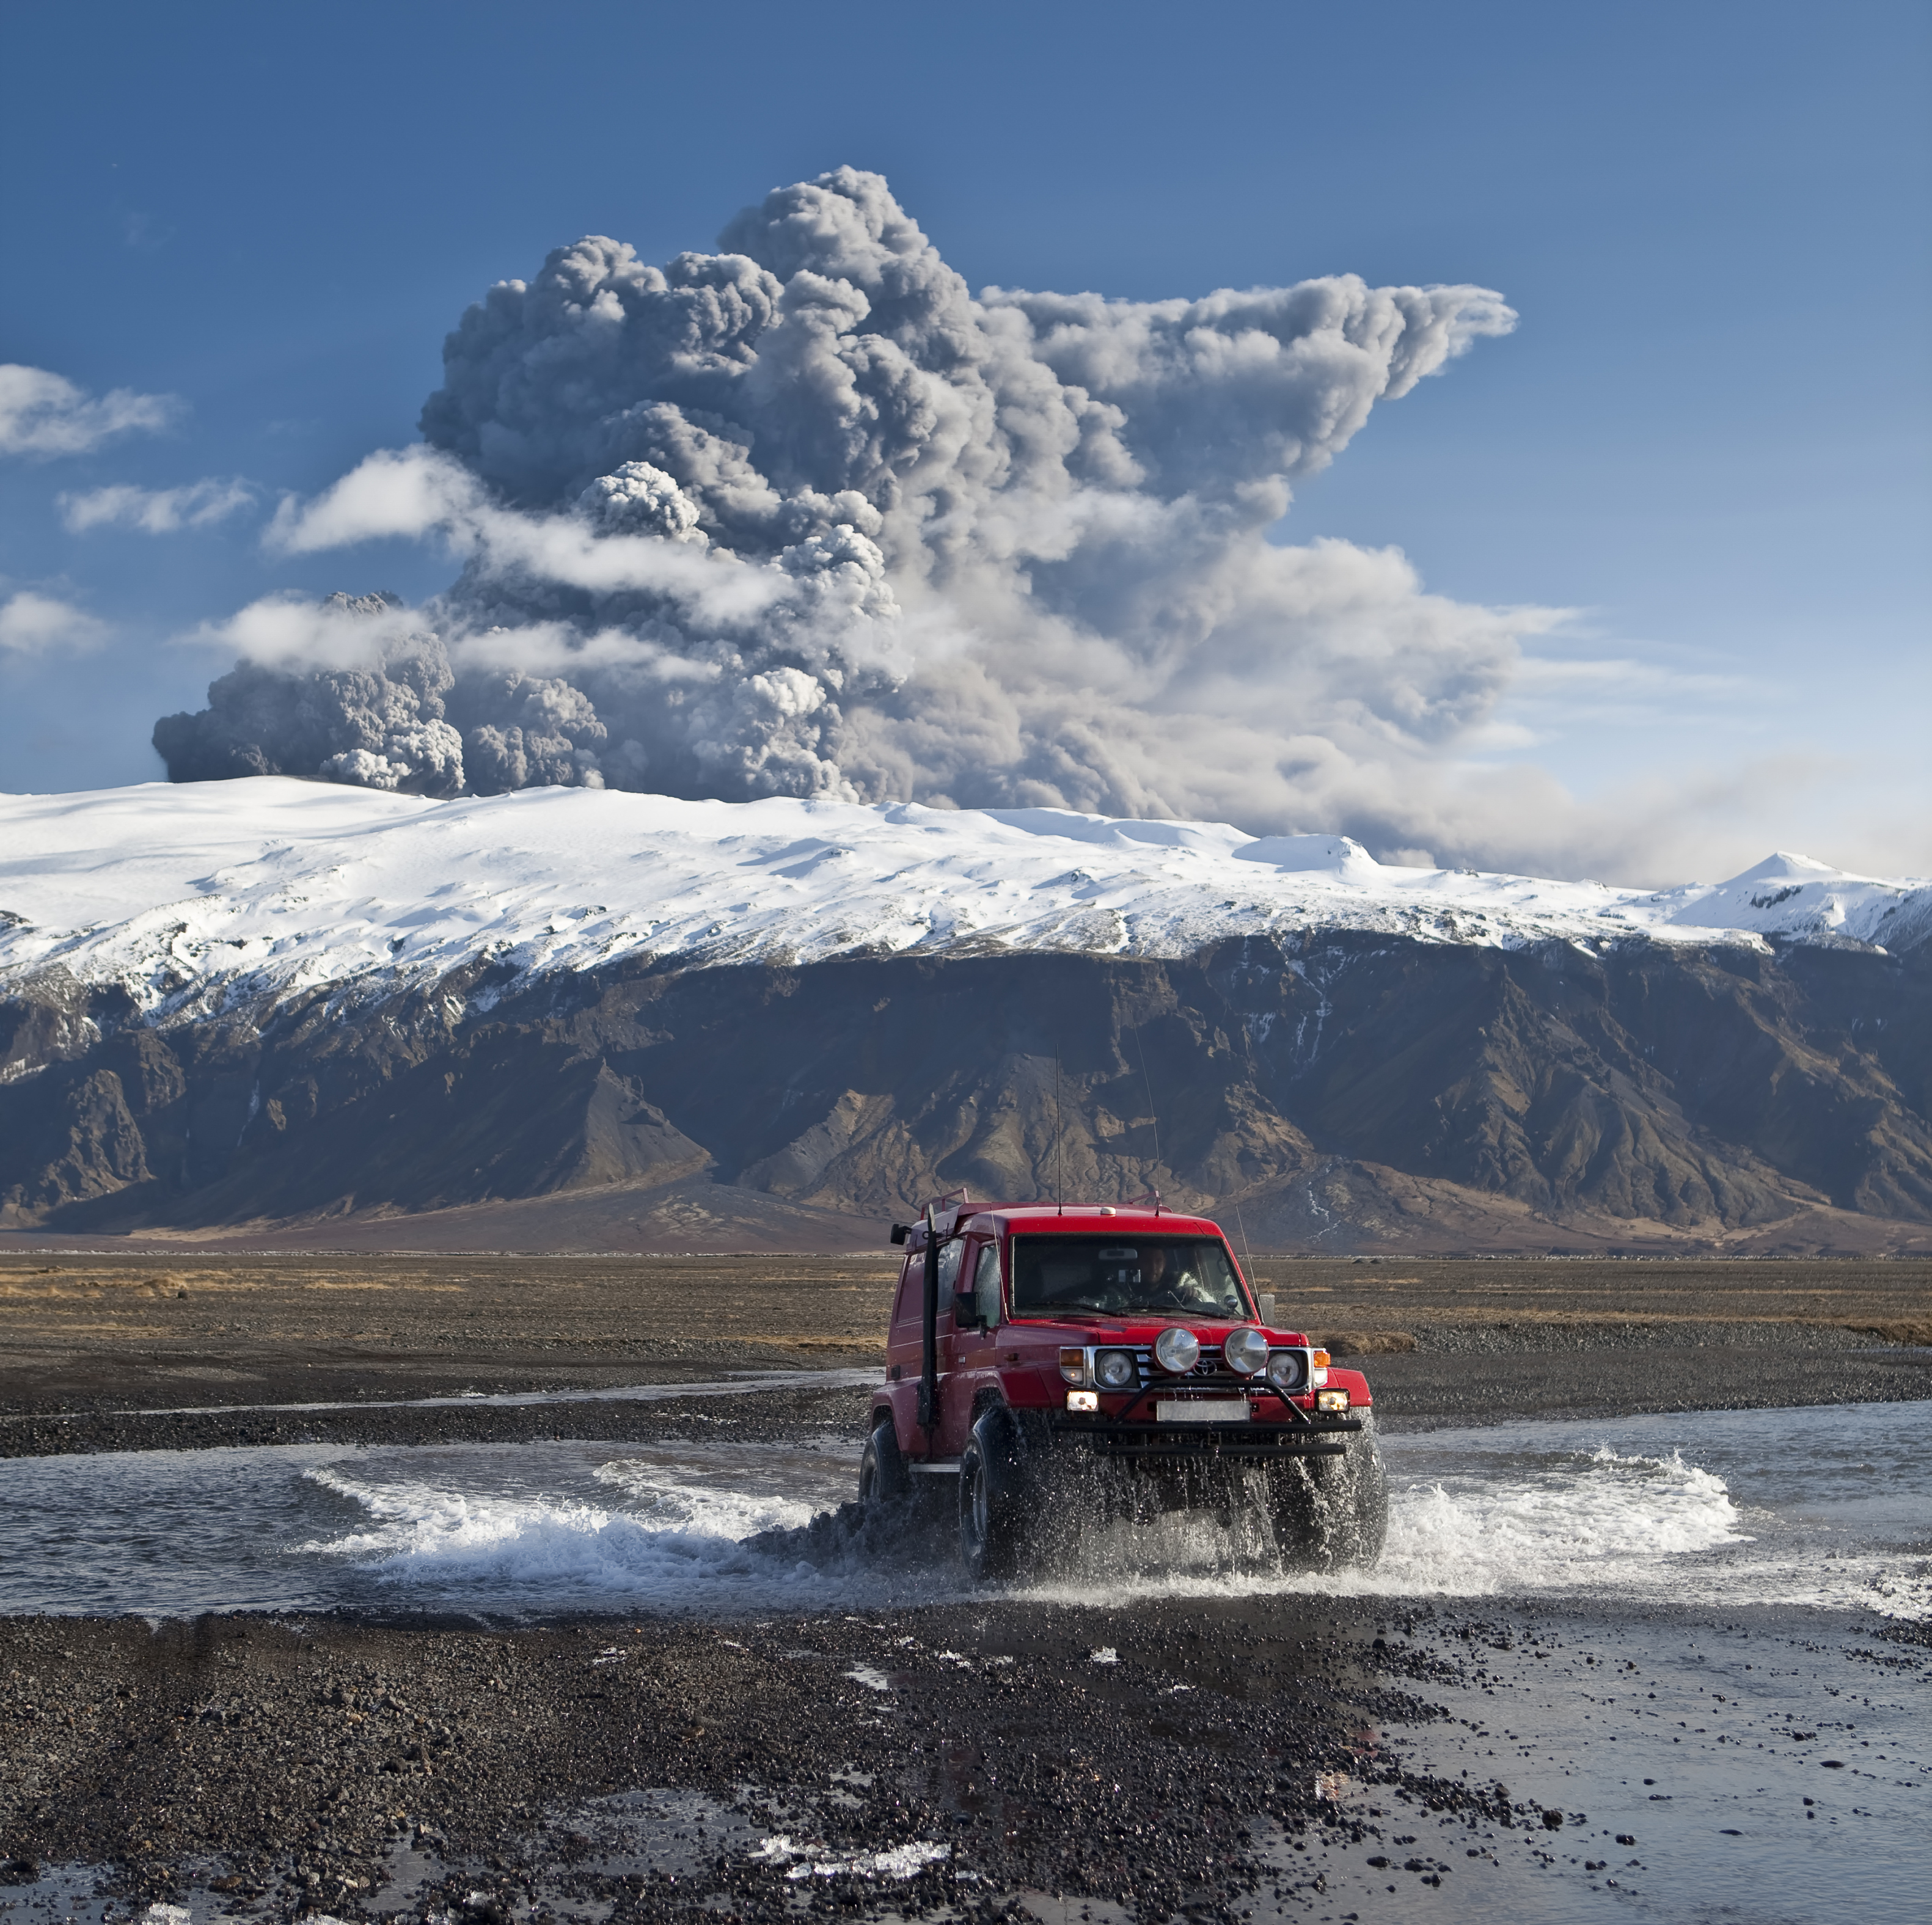 Get used to this: The Eyjafjallajökull eruption in 2010